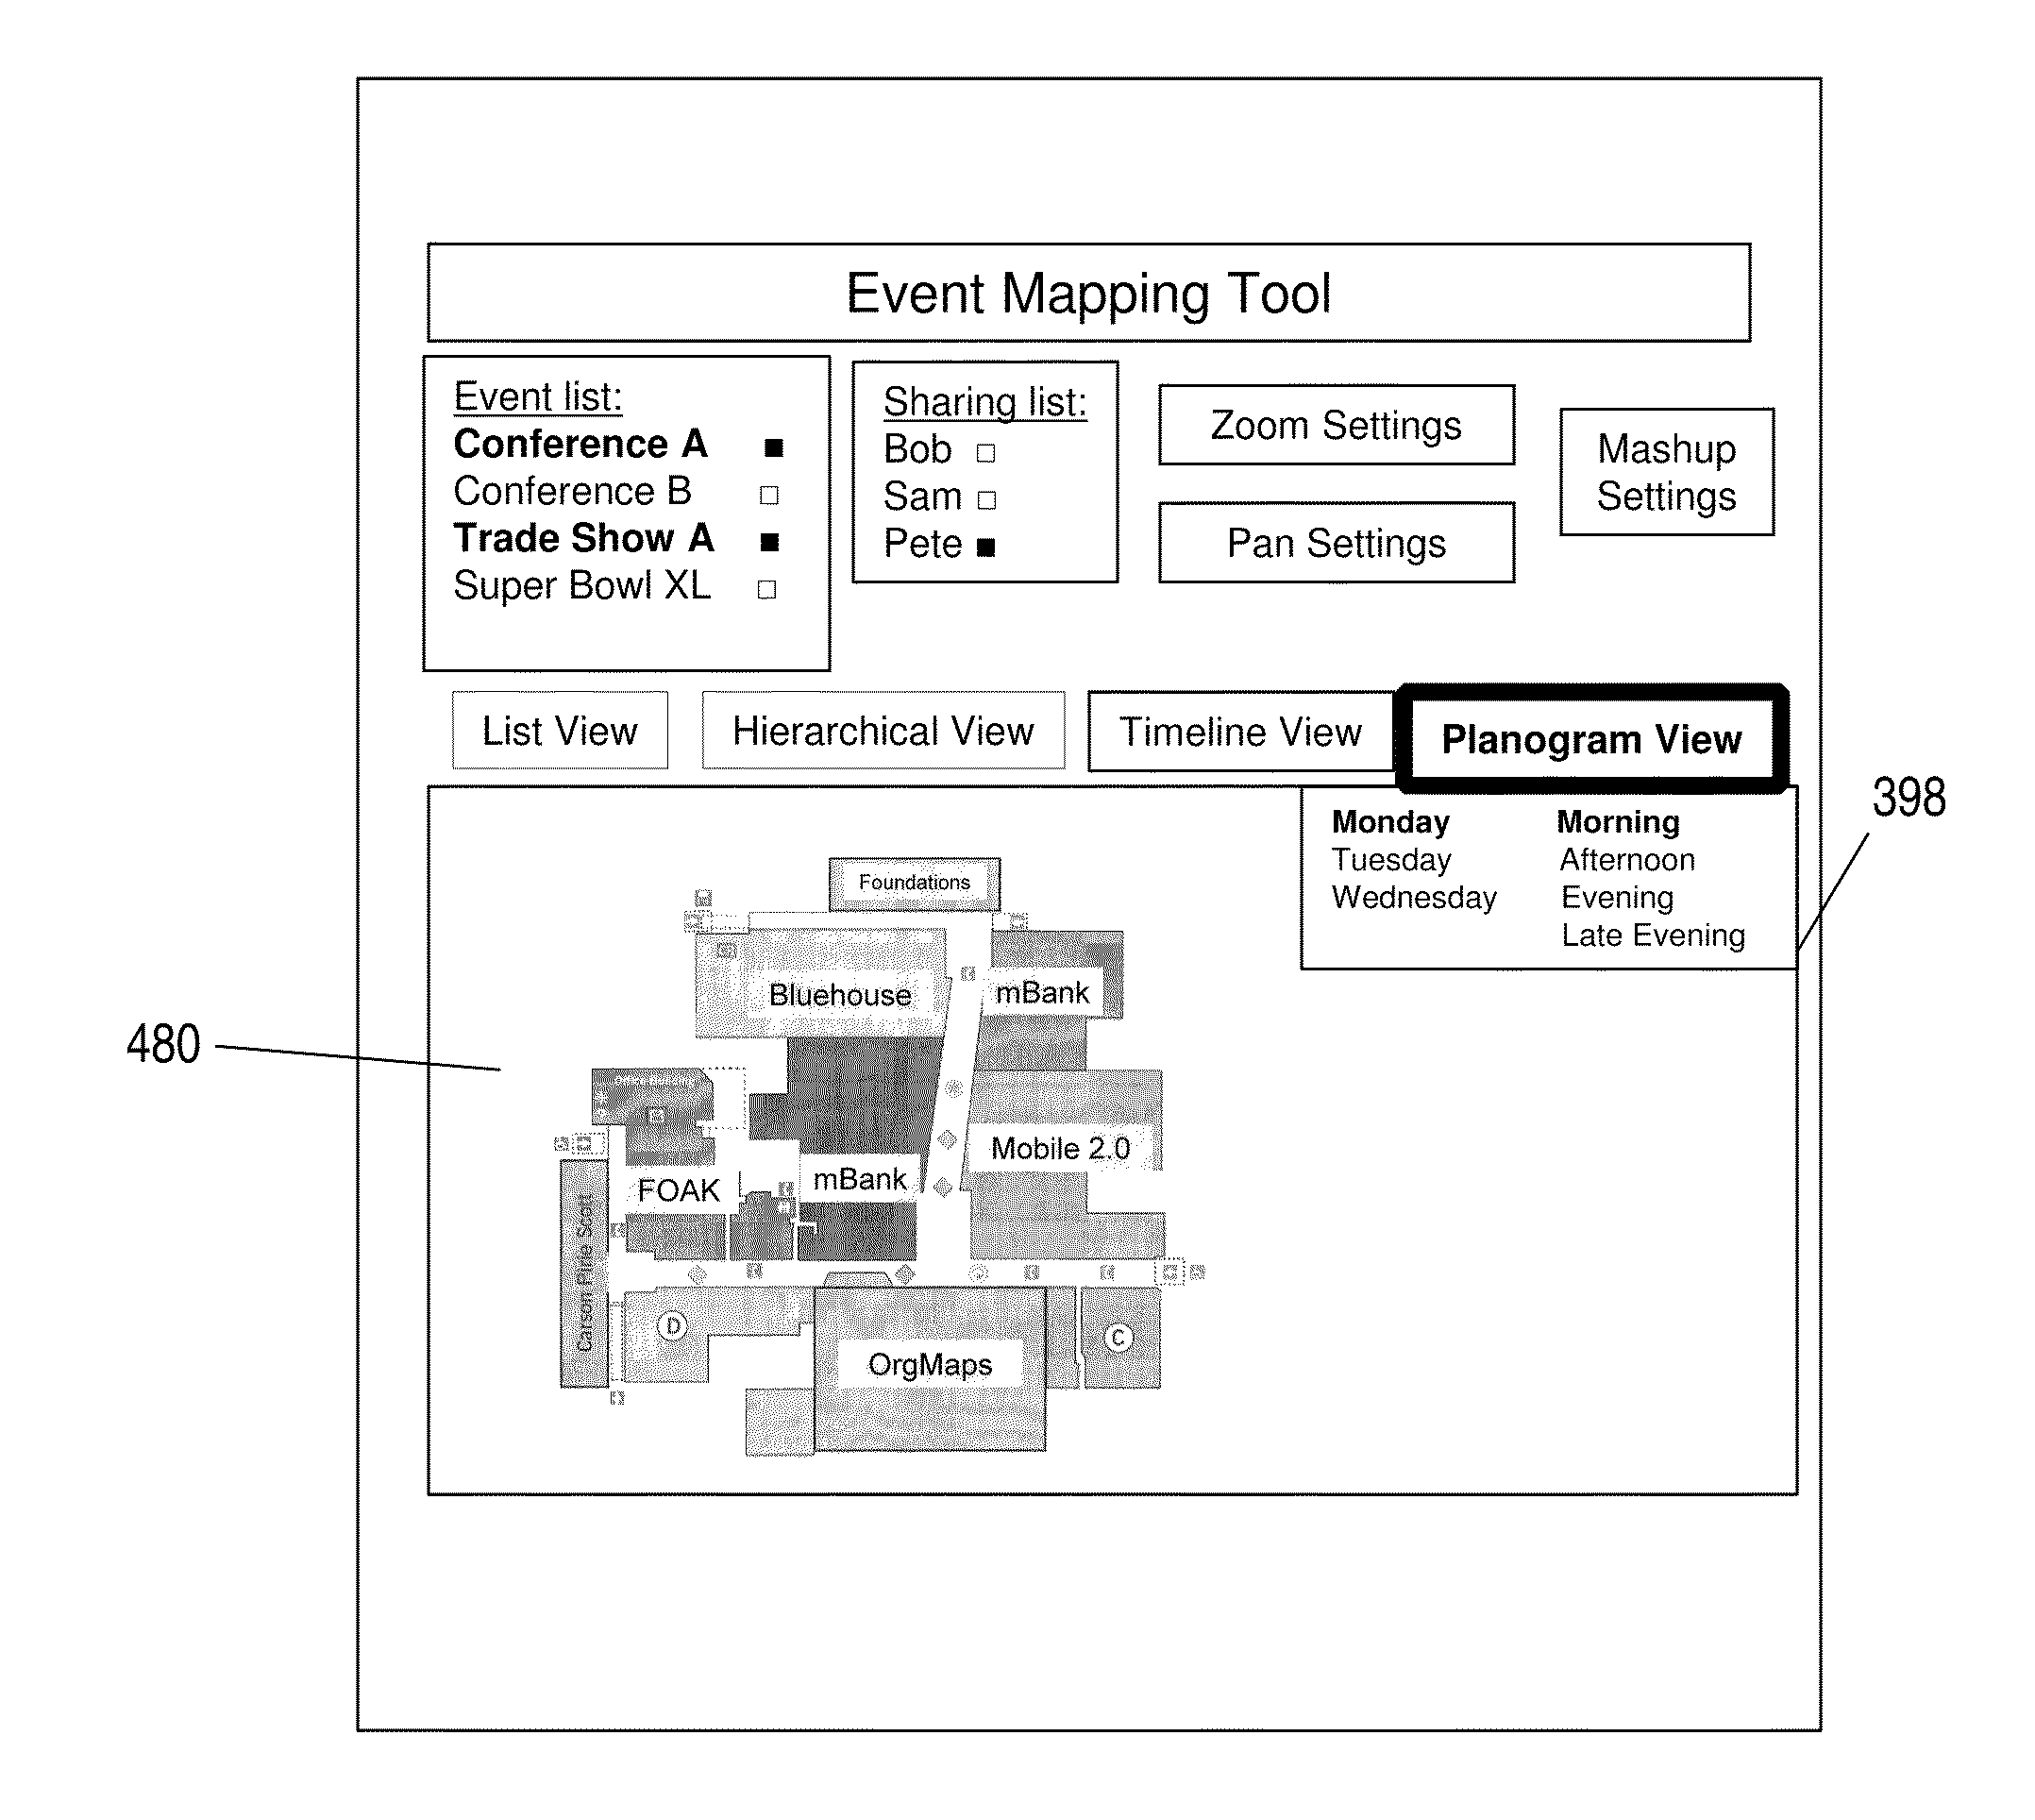 Tool and method for mapping and viewing an event